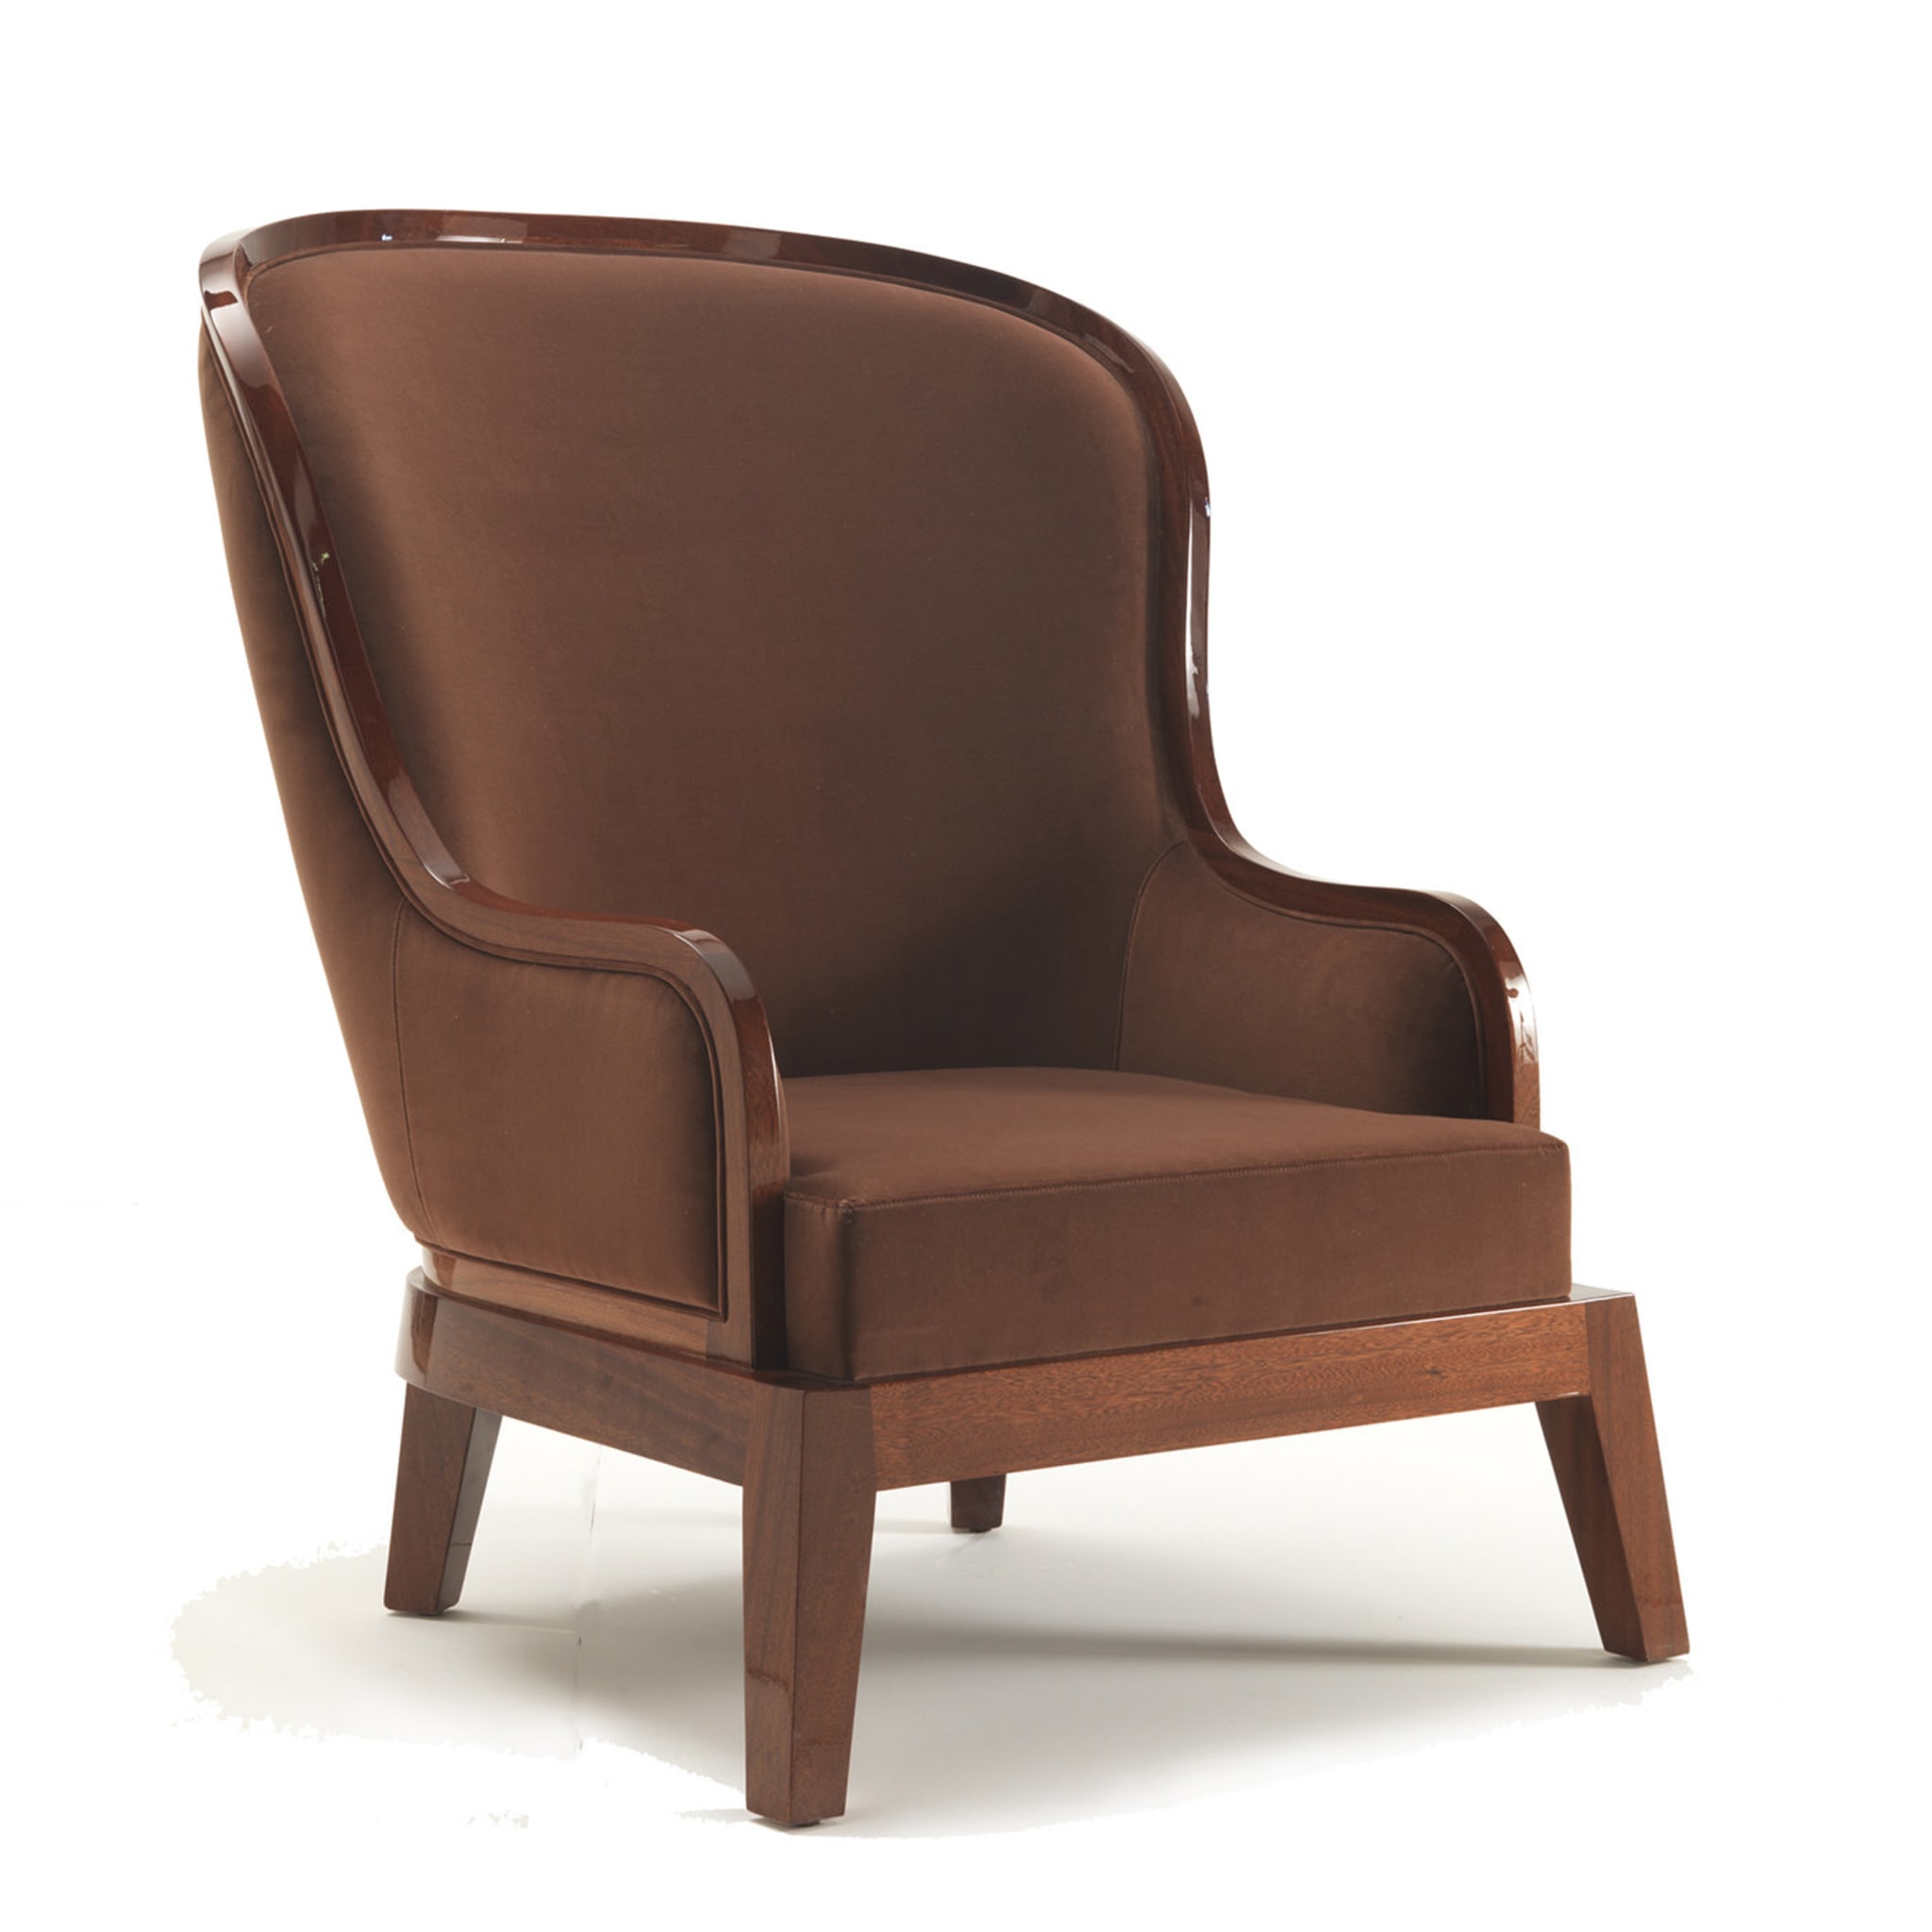 Curzon Armchair by Archer Humphryes Architects - Alternative view 1